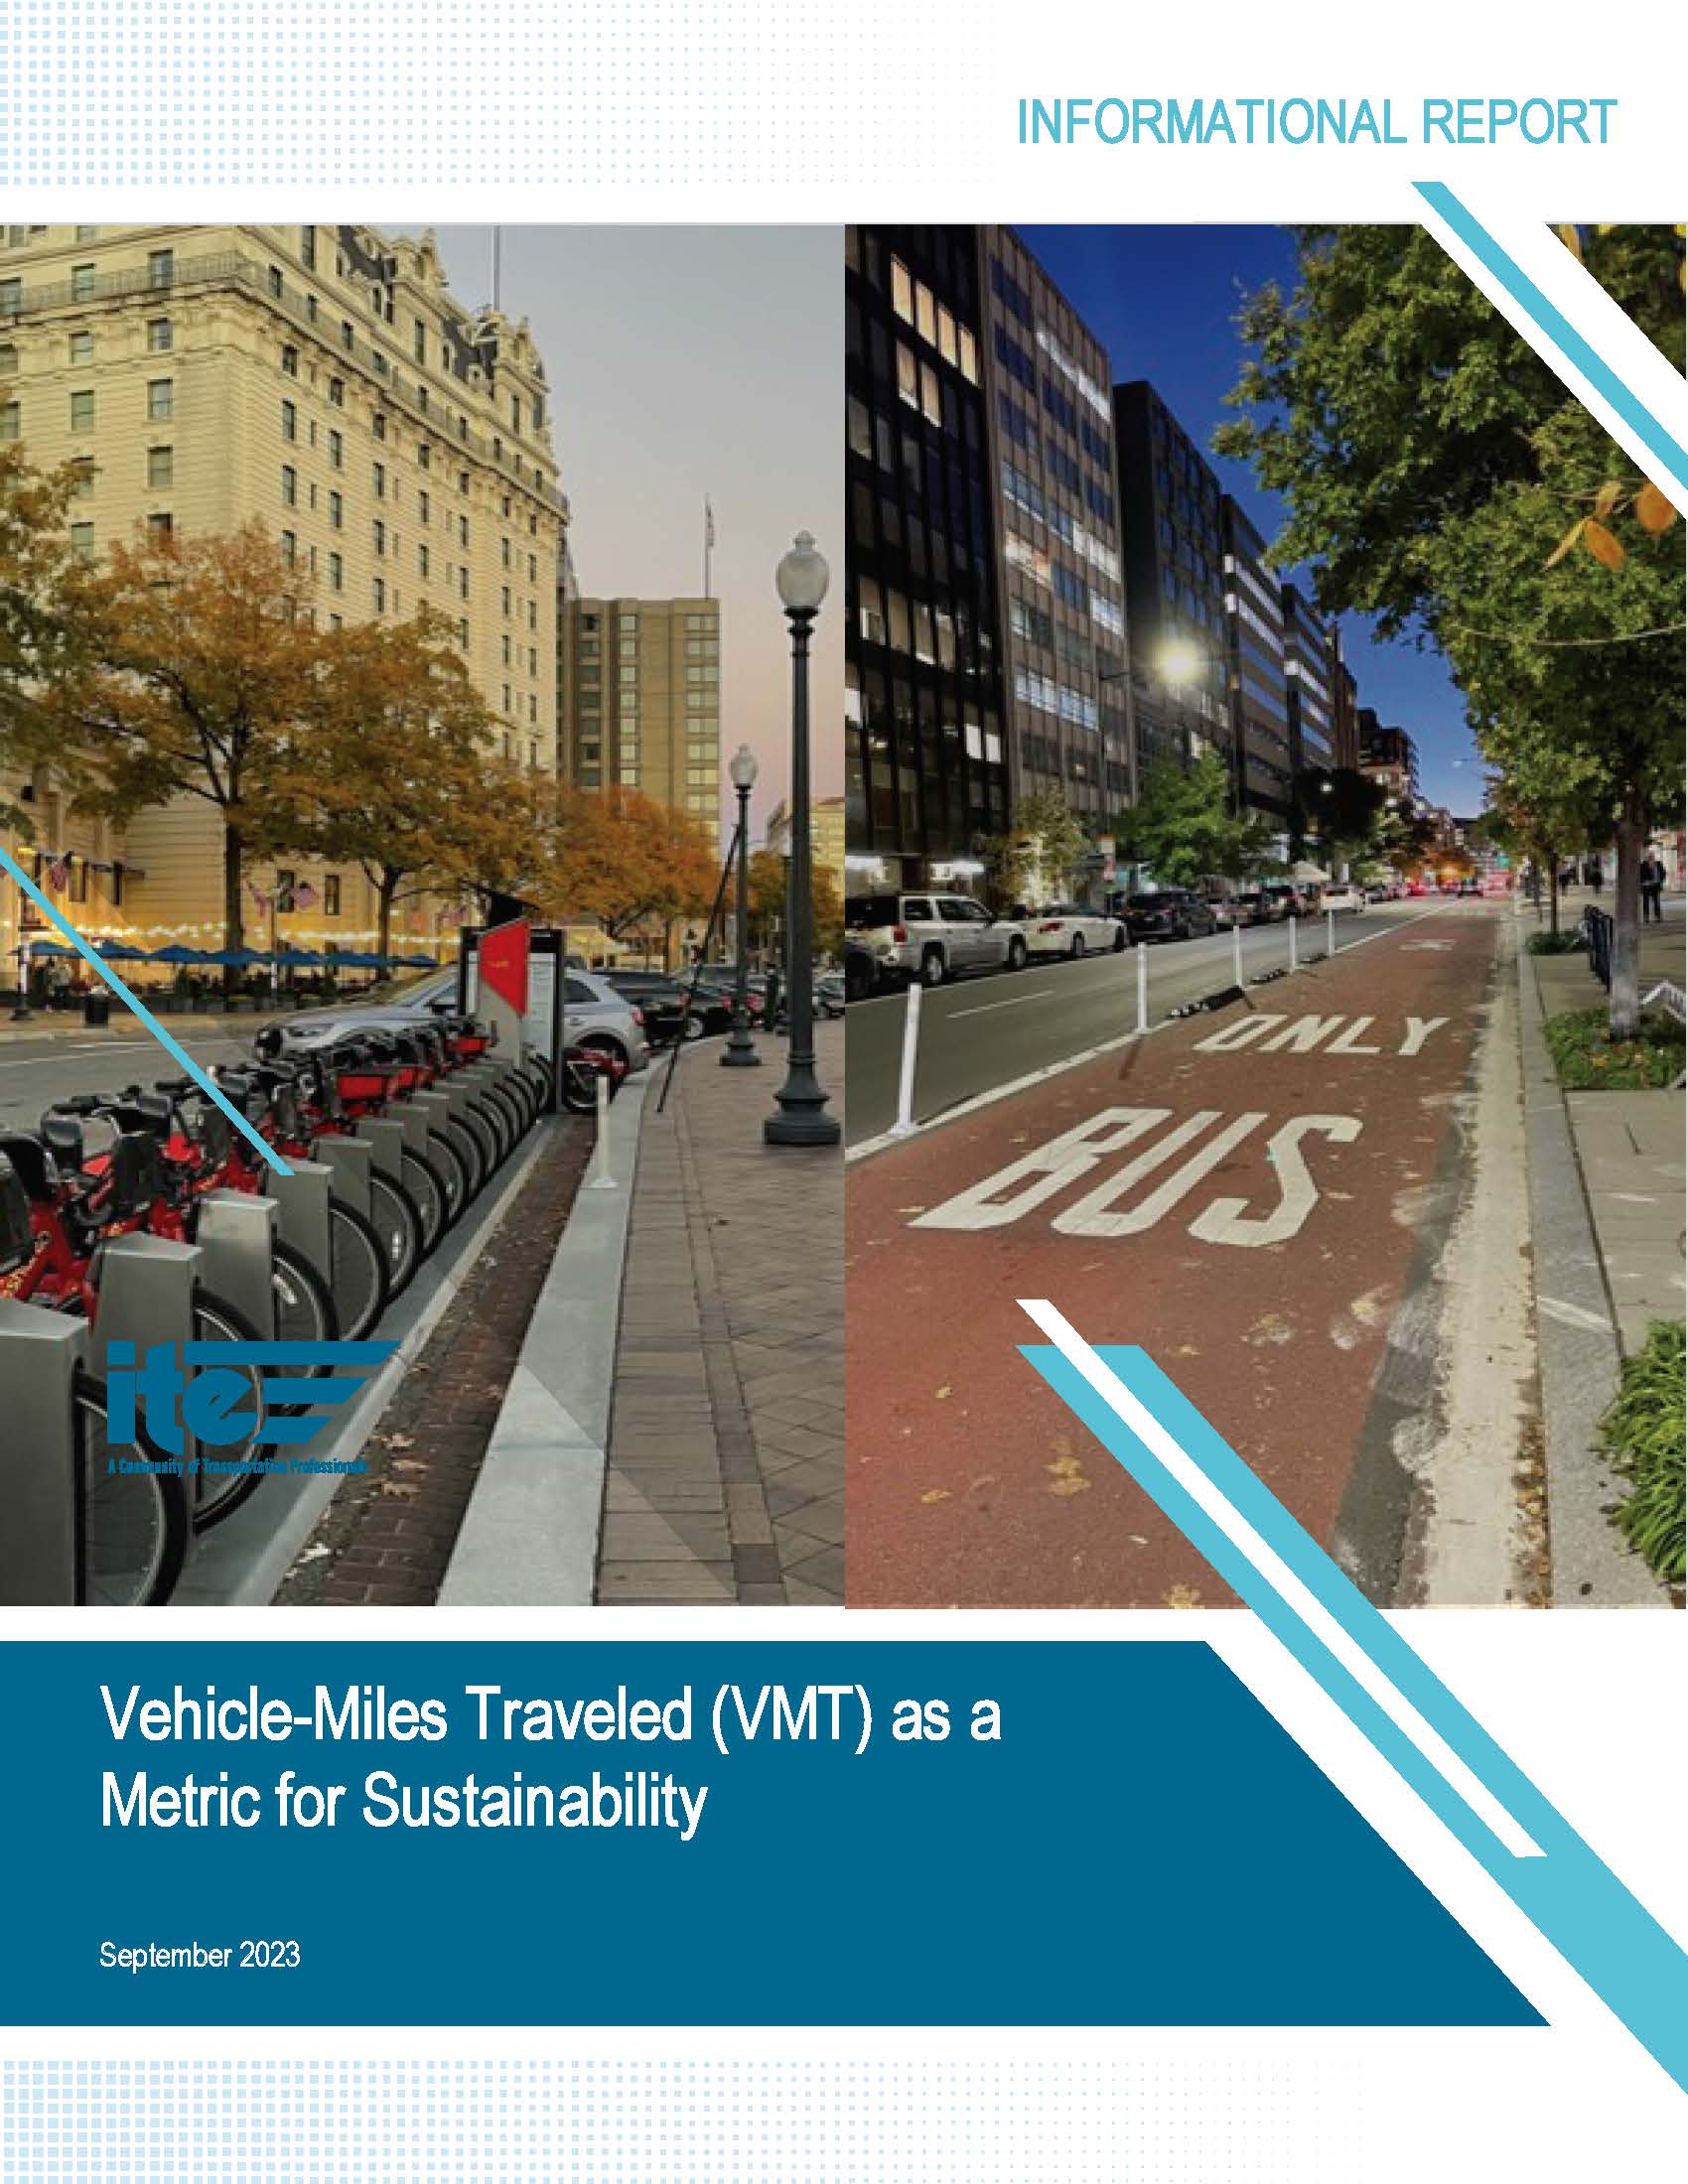 VMT as a Metric for Sustainability (PDF)